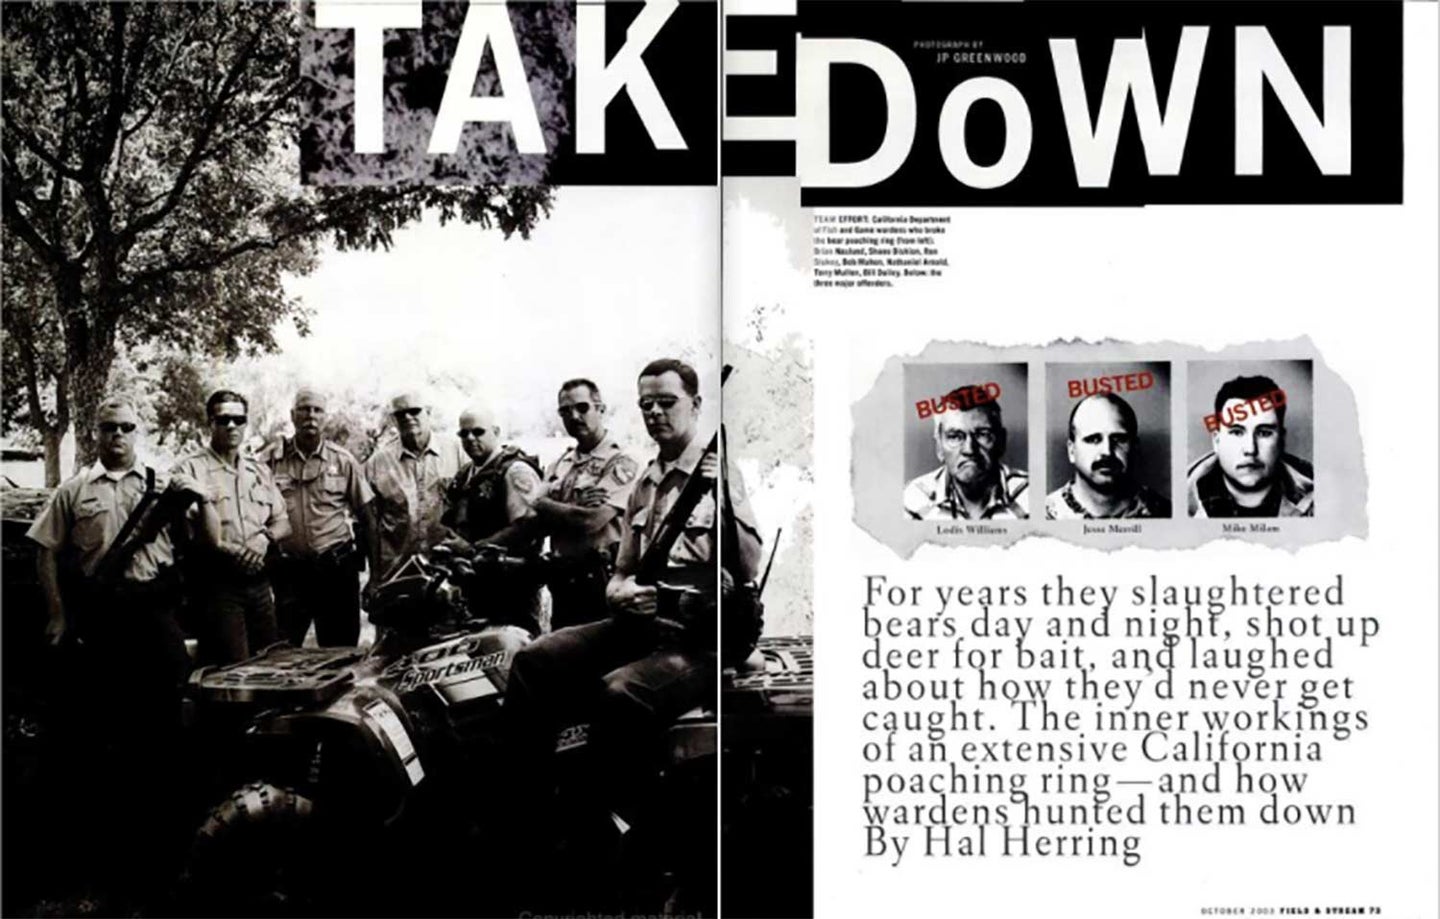 A clipping from Field & stream magazine with the headline: "The Takedown"